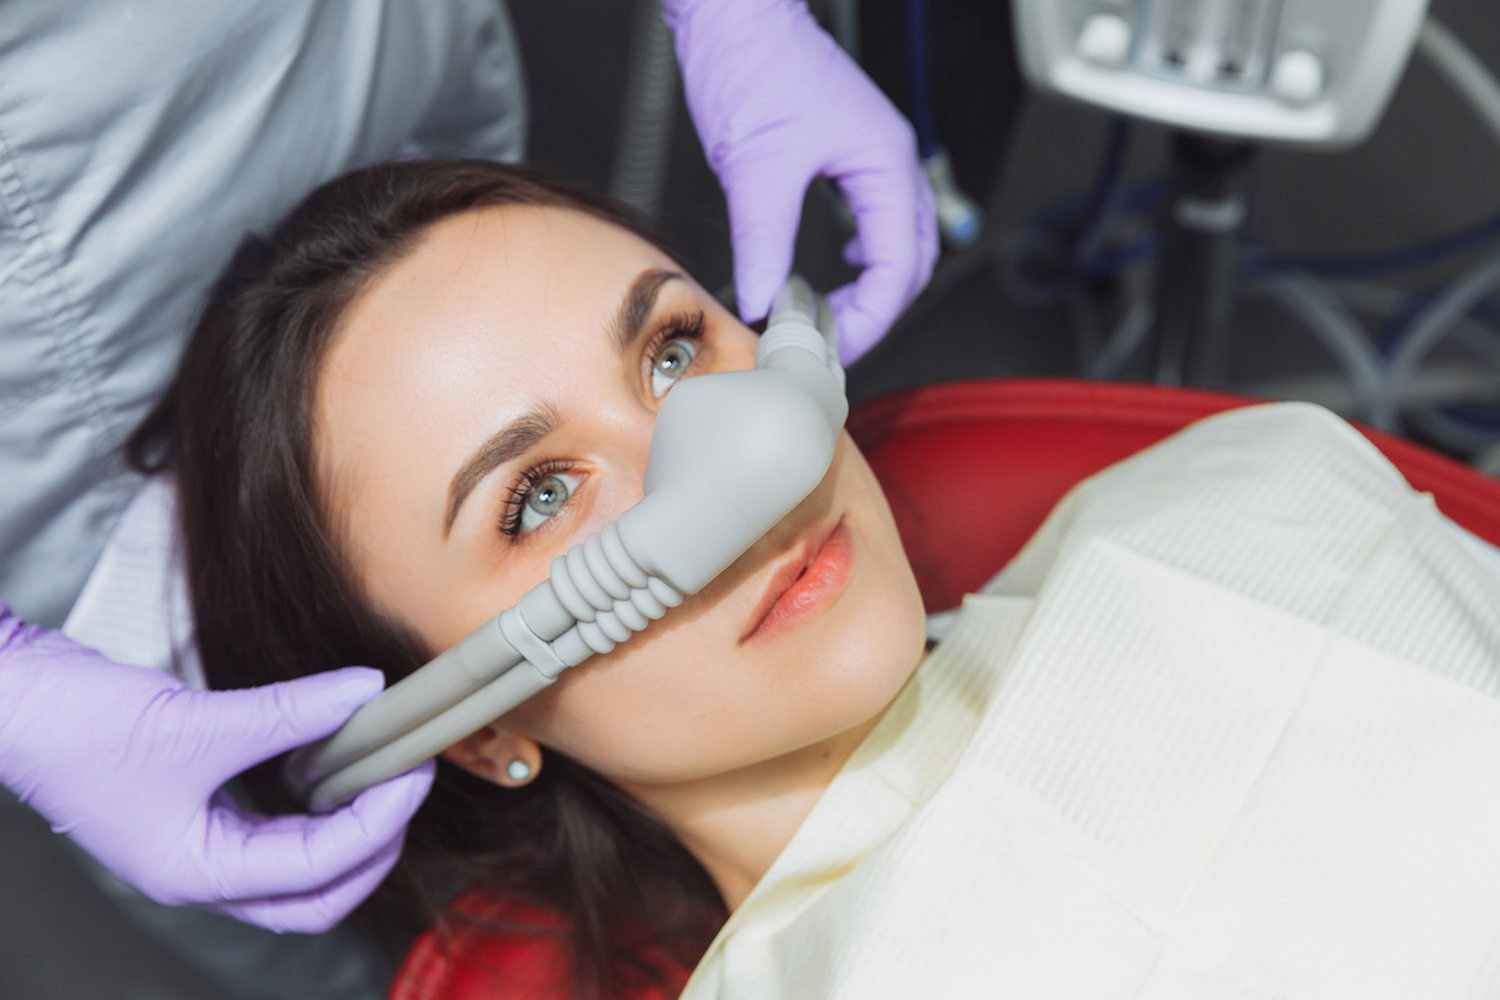 A woman is laying in a dental chair with an oxygen mask on her face.